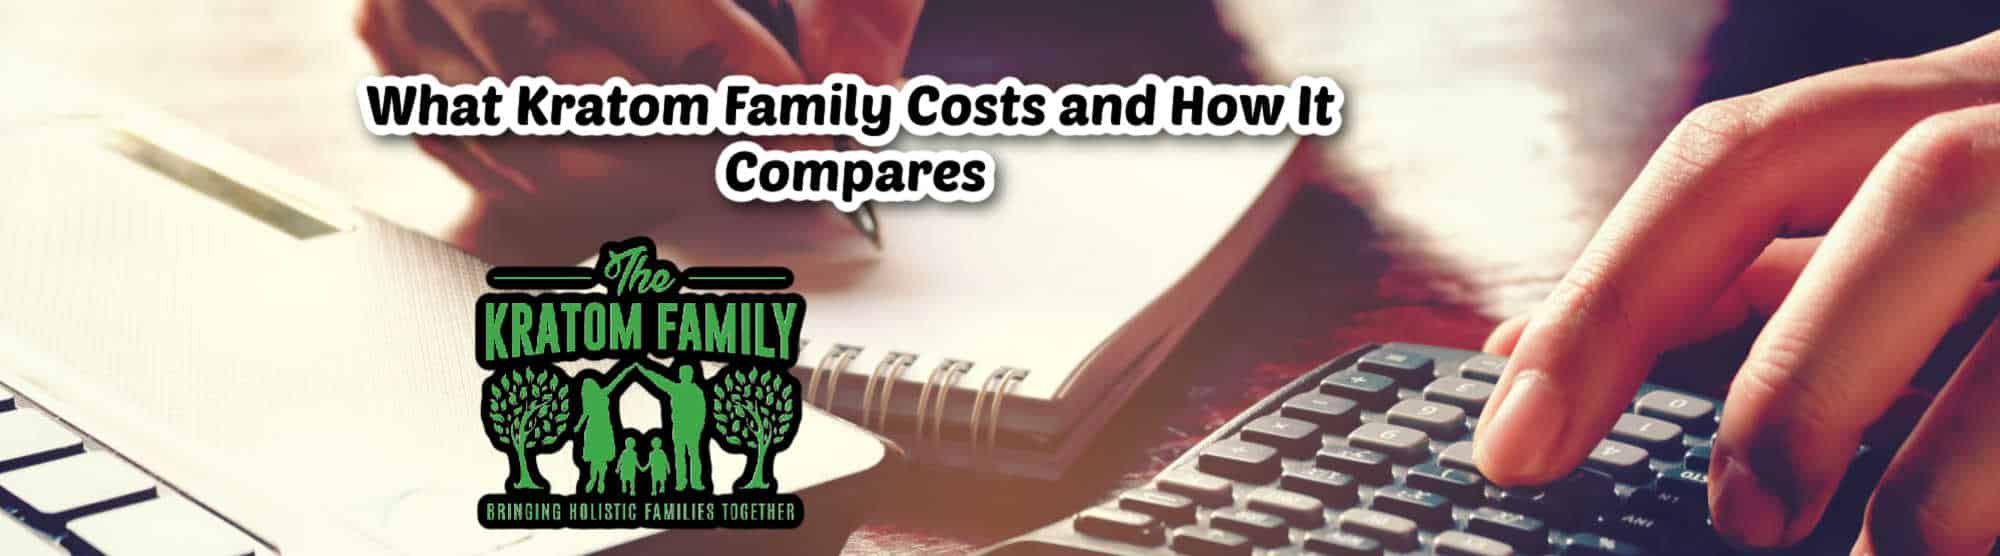 image of what kratom family costs and how it compares